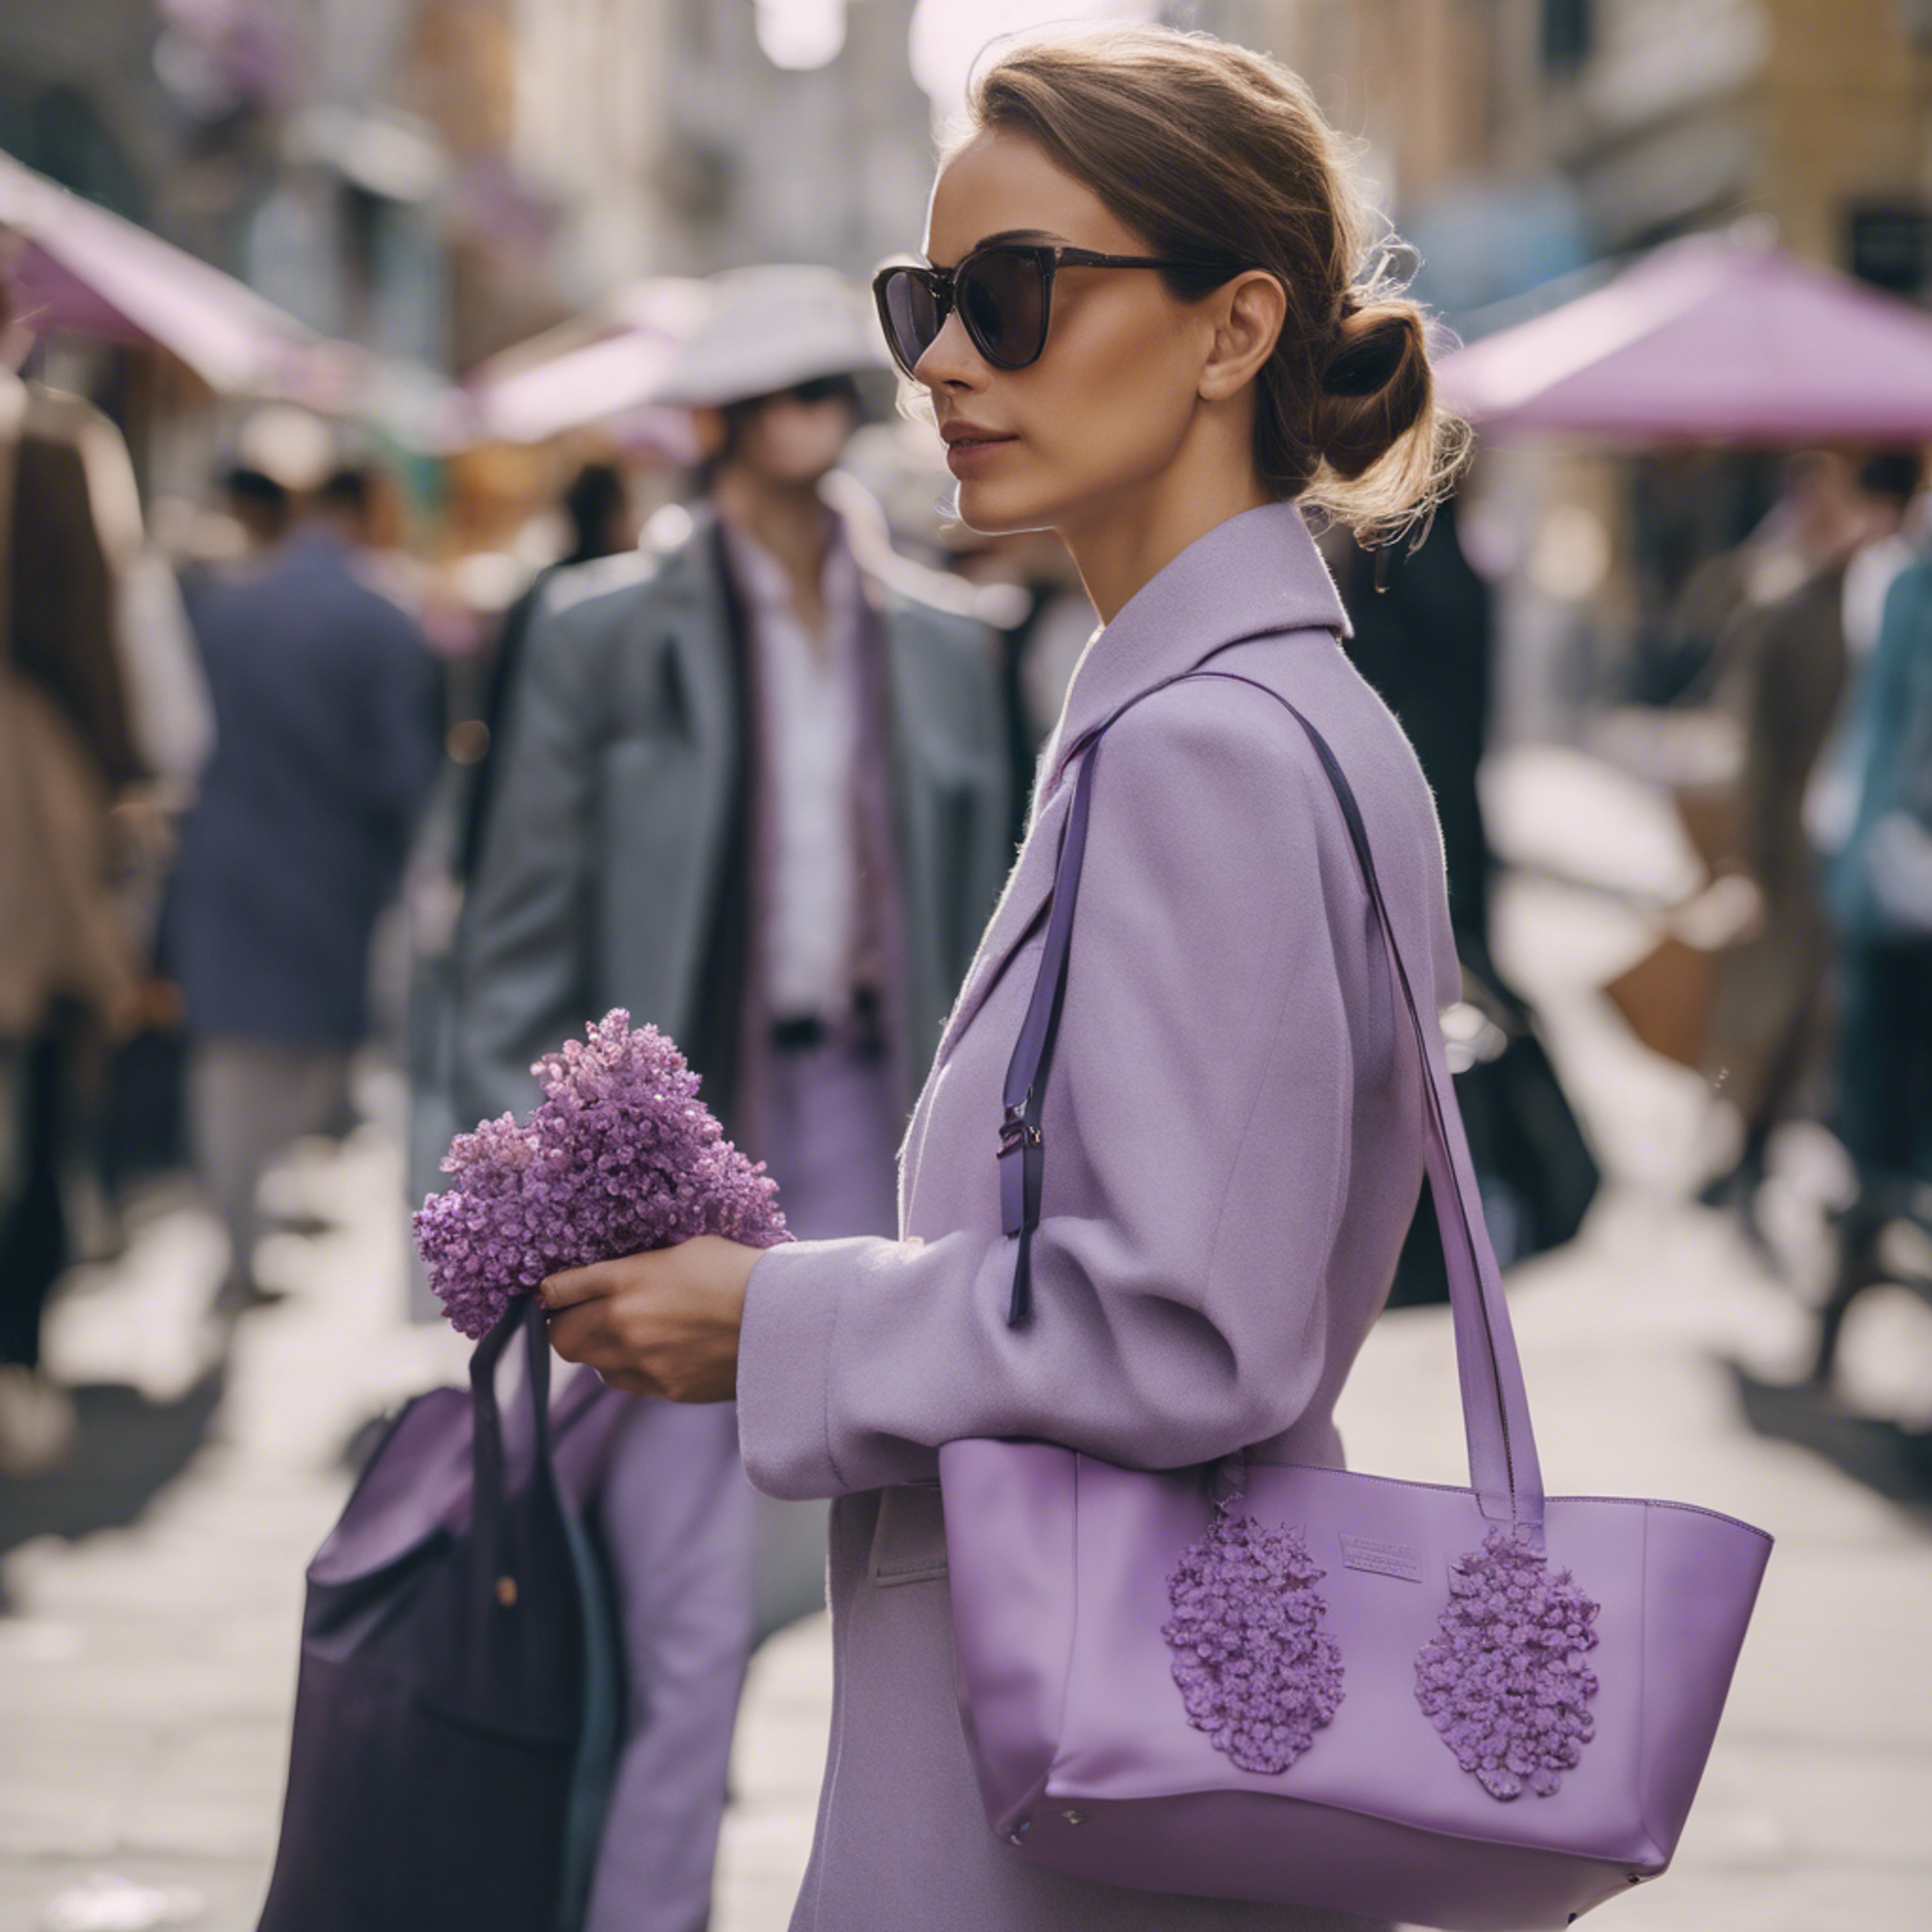 An elegant lady carrying a preppy lilac tote bag while walking along a crowded city street. Tapeet[fda66da185c34bc685d3]